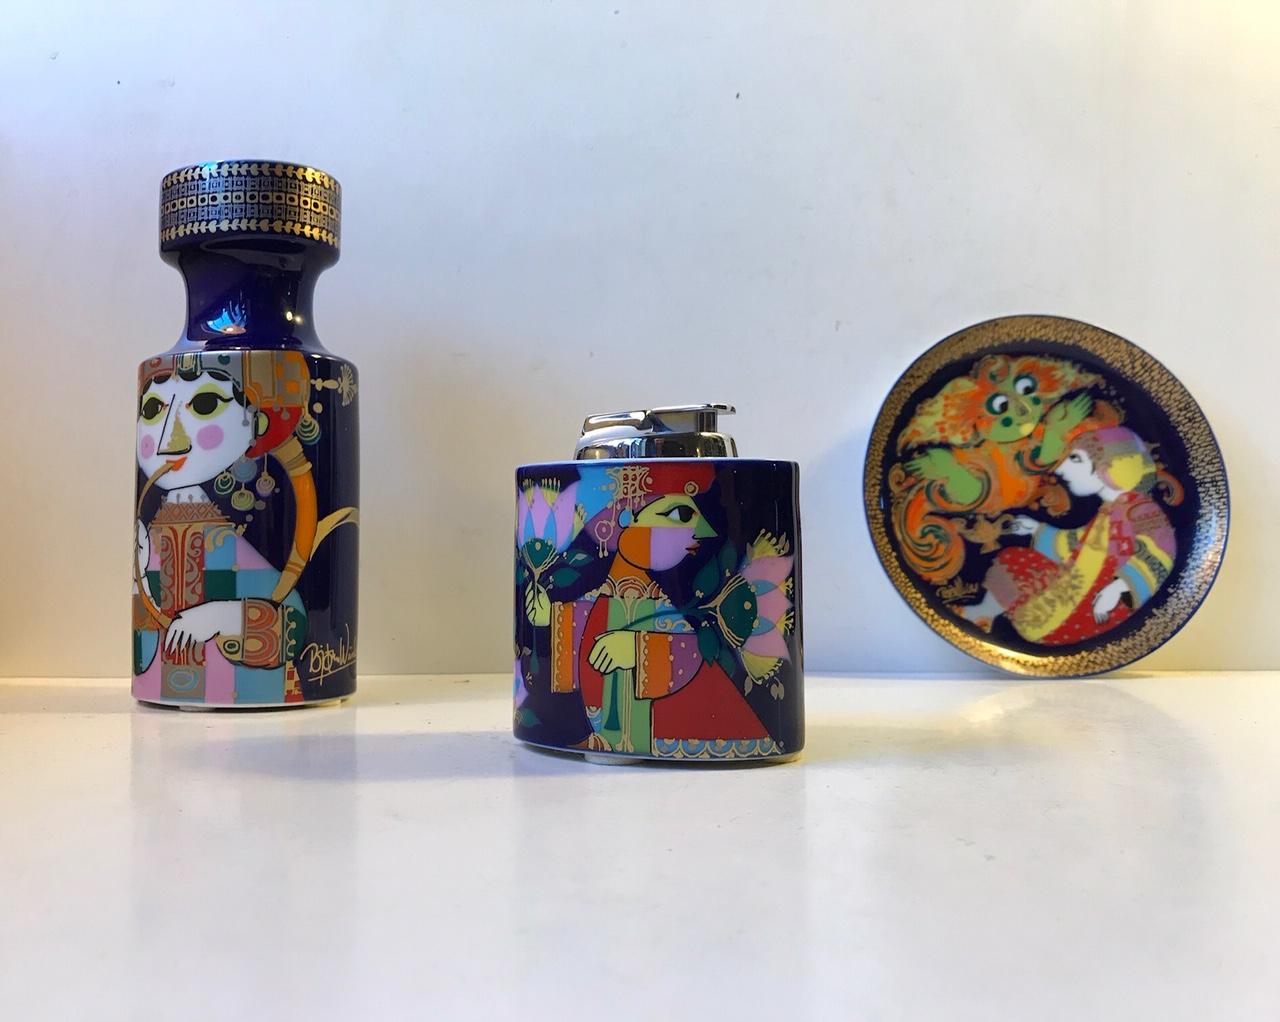 Wiinblad Studio Line set consisting of ashtray/dish, candlestick and table lighter. Colorful and characteristic Wiinblad fantasy figurines. Manufactured by Rosenthal in Germany during the 1970s. The lighter itself is from Ronson and has not been